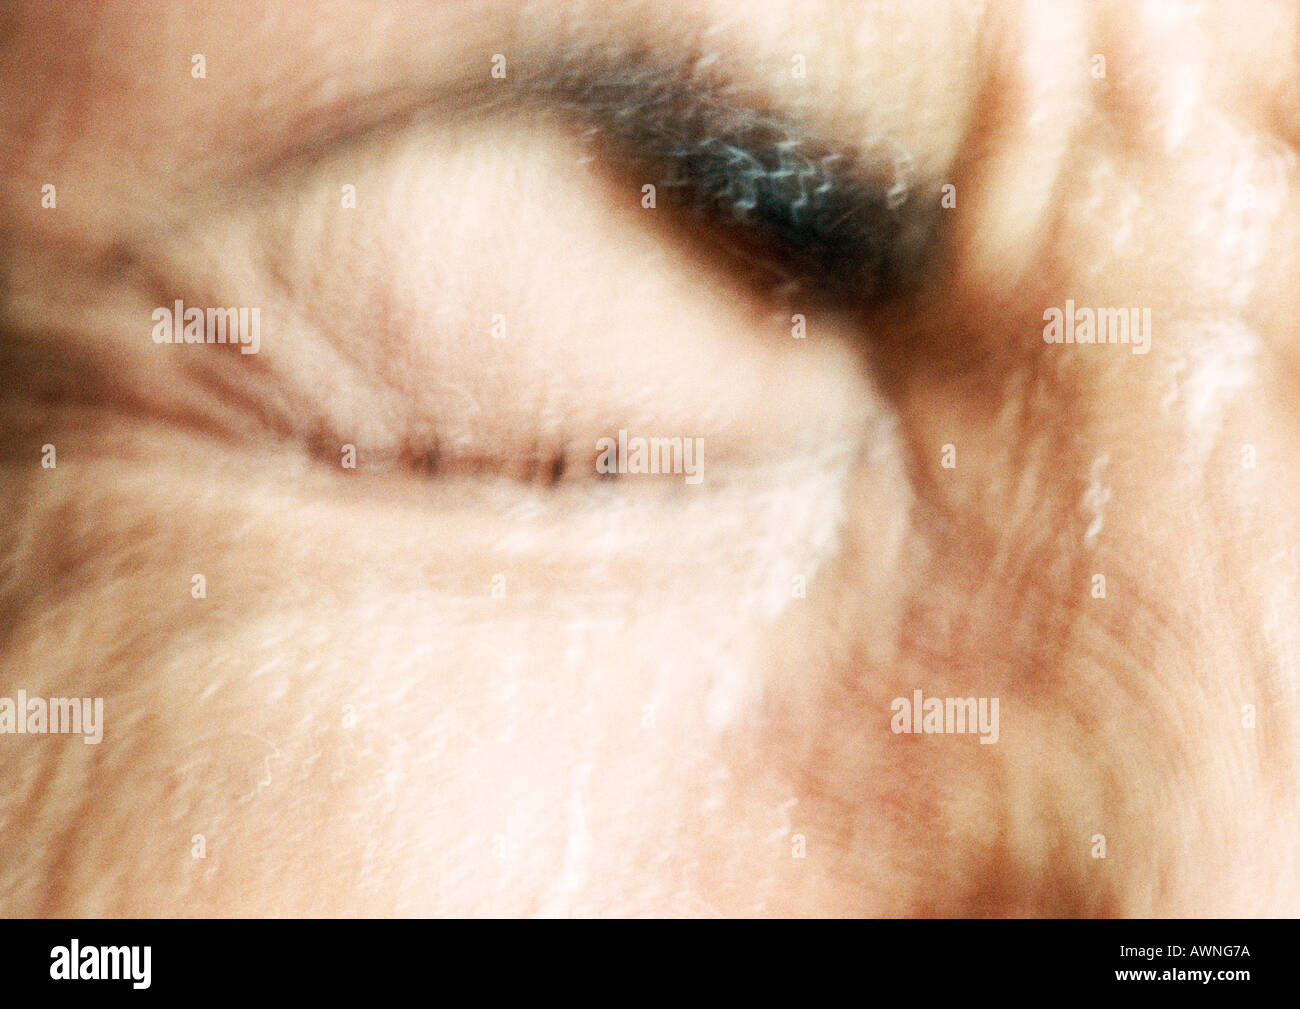 Partial view of woman's wrinkled face,  eye squeezed closed, blurred. Stock Photo